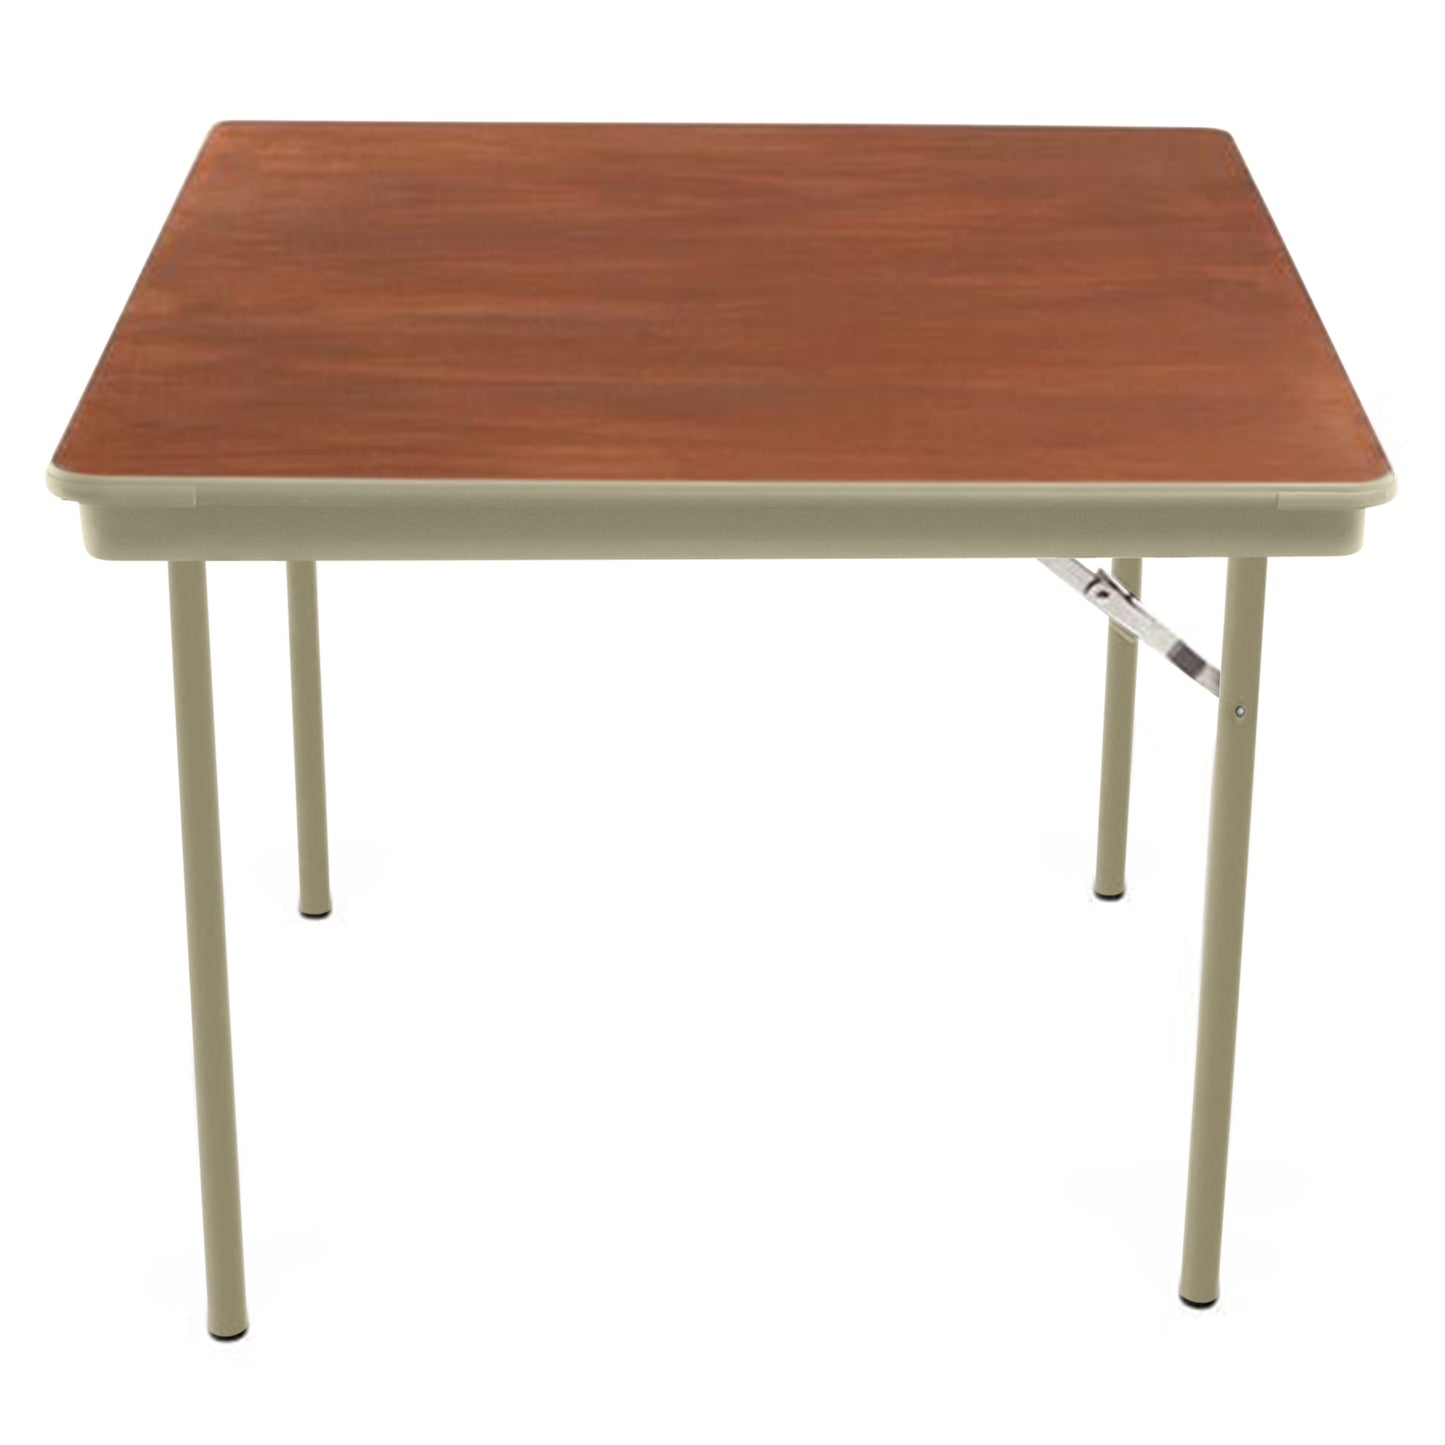 AmTab Folding Table - Plywood Stained and Sealed - Vinyl T-Molding Edge - Square - 36"W x 36"L x 29"H  (AmTab AMT-SQ36PM)